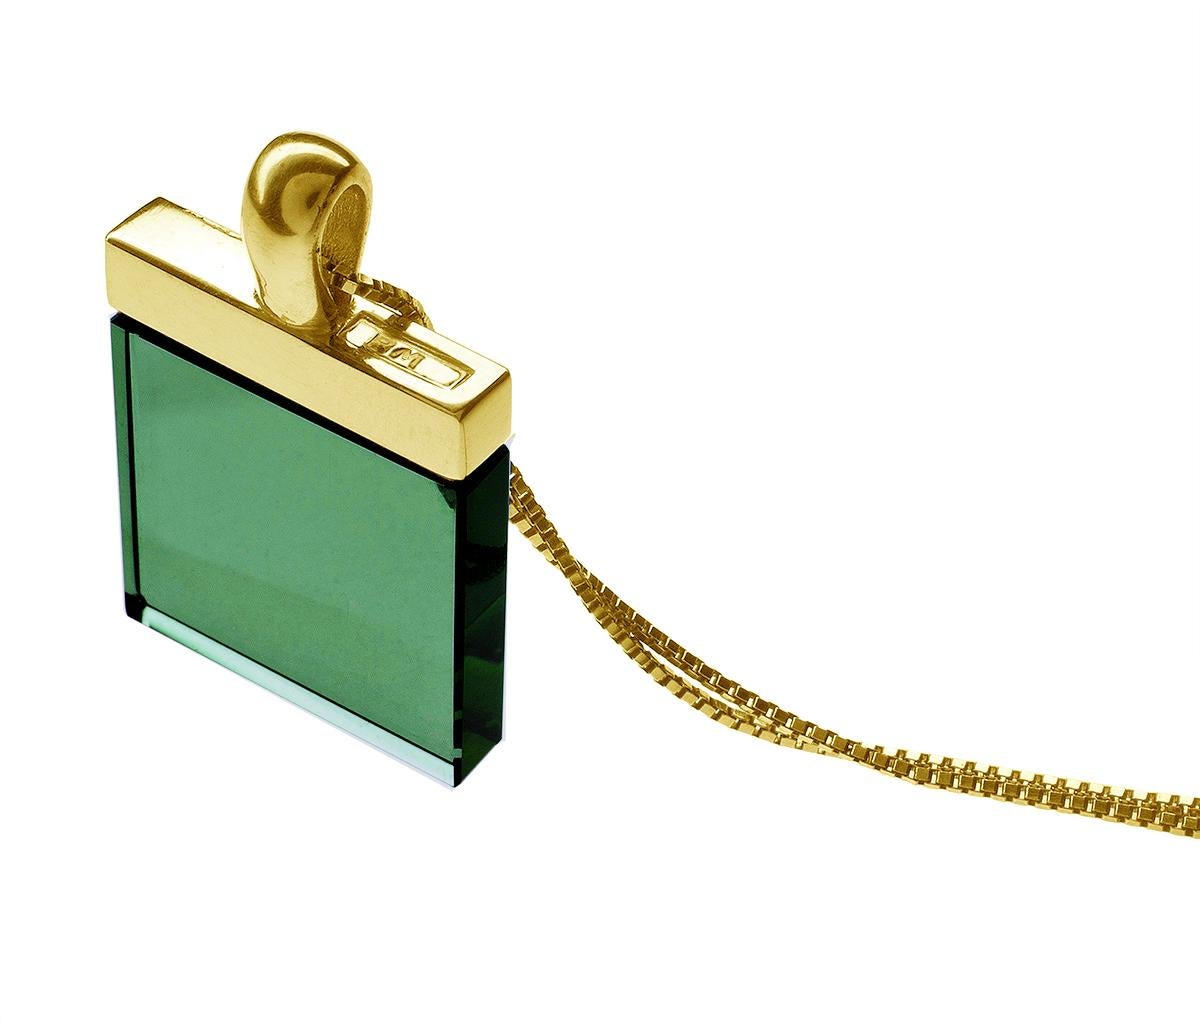 This designer Ink pendant necklace is made of 18 karat yellow gold and features a large 15x15x3 mm transparent dark green grown quartz. The Ink collection has been featured in Harper's Bazaar and Vogue UA.

The cut of the gem is unique, allowing